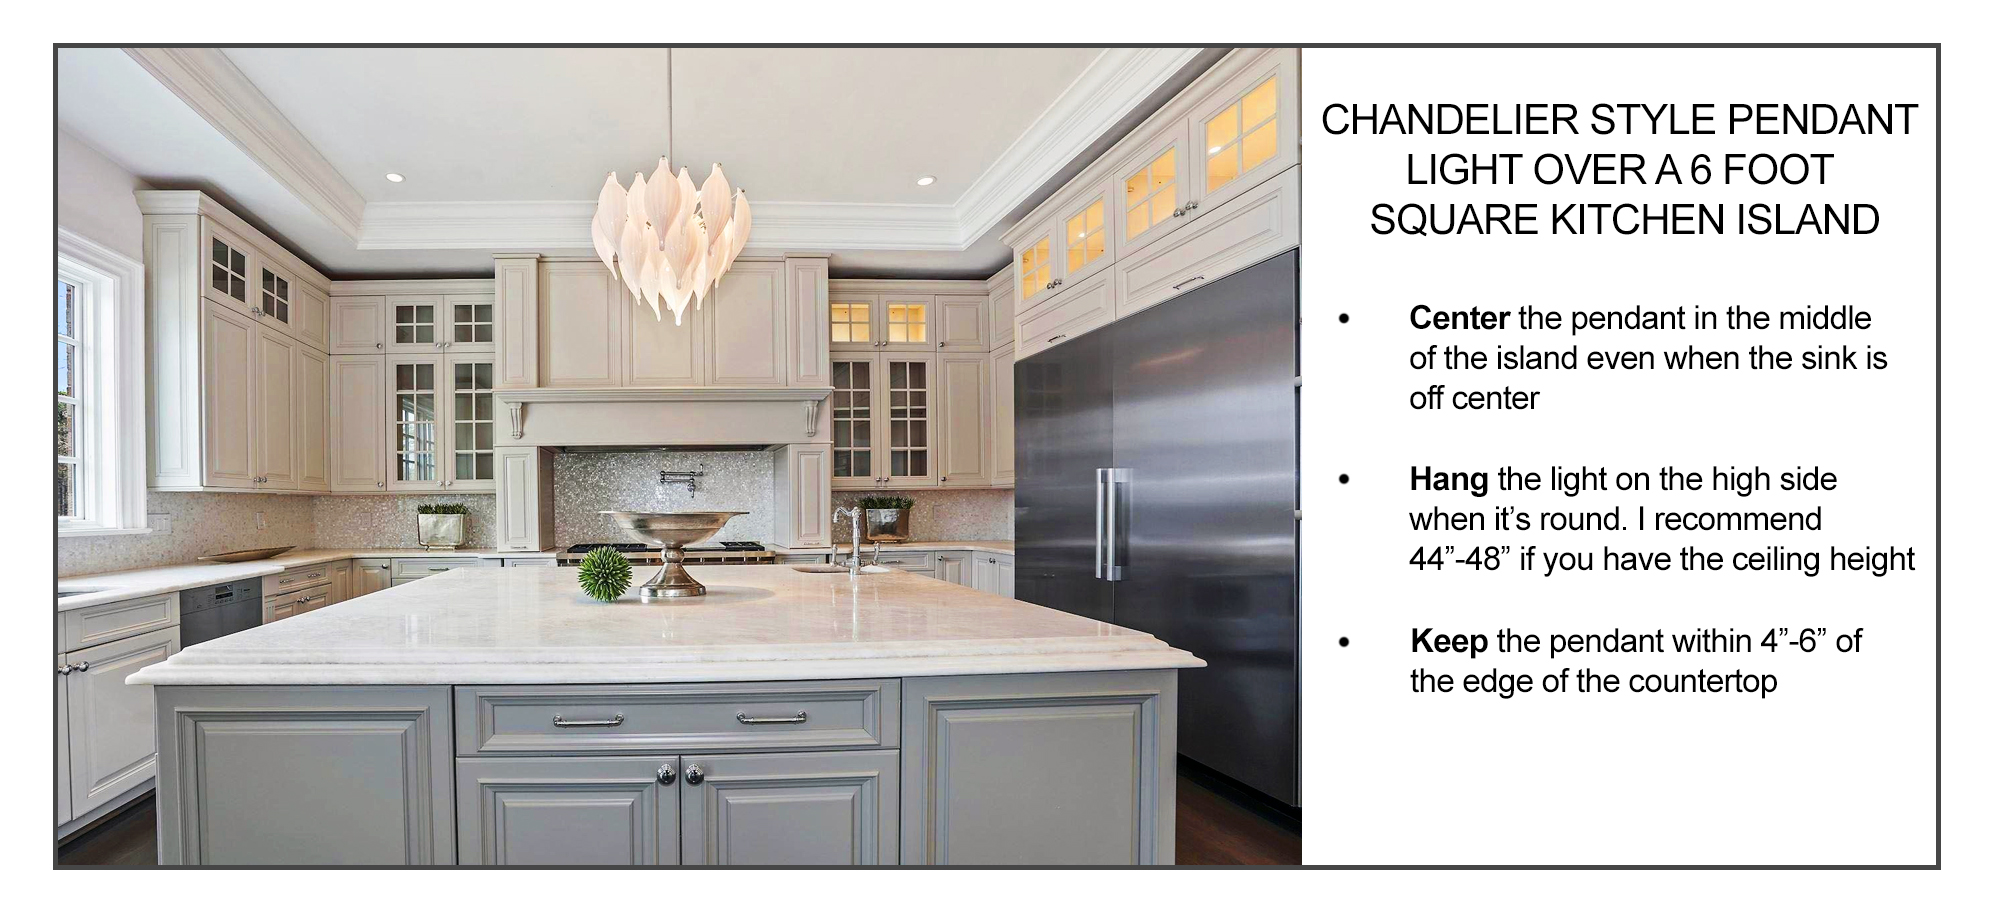 how to hang a single chandelier pendant light over an island inforgraphic 